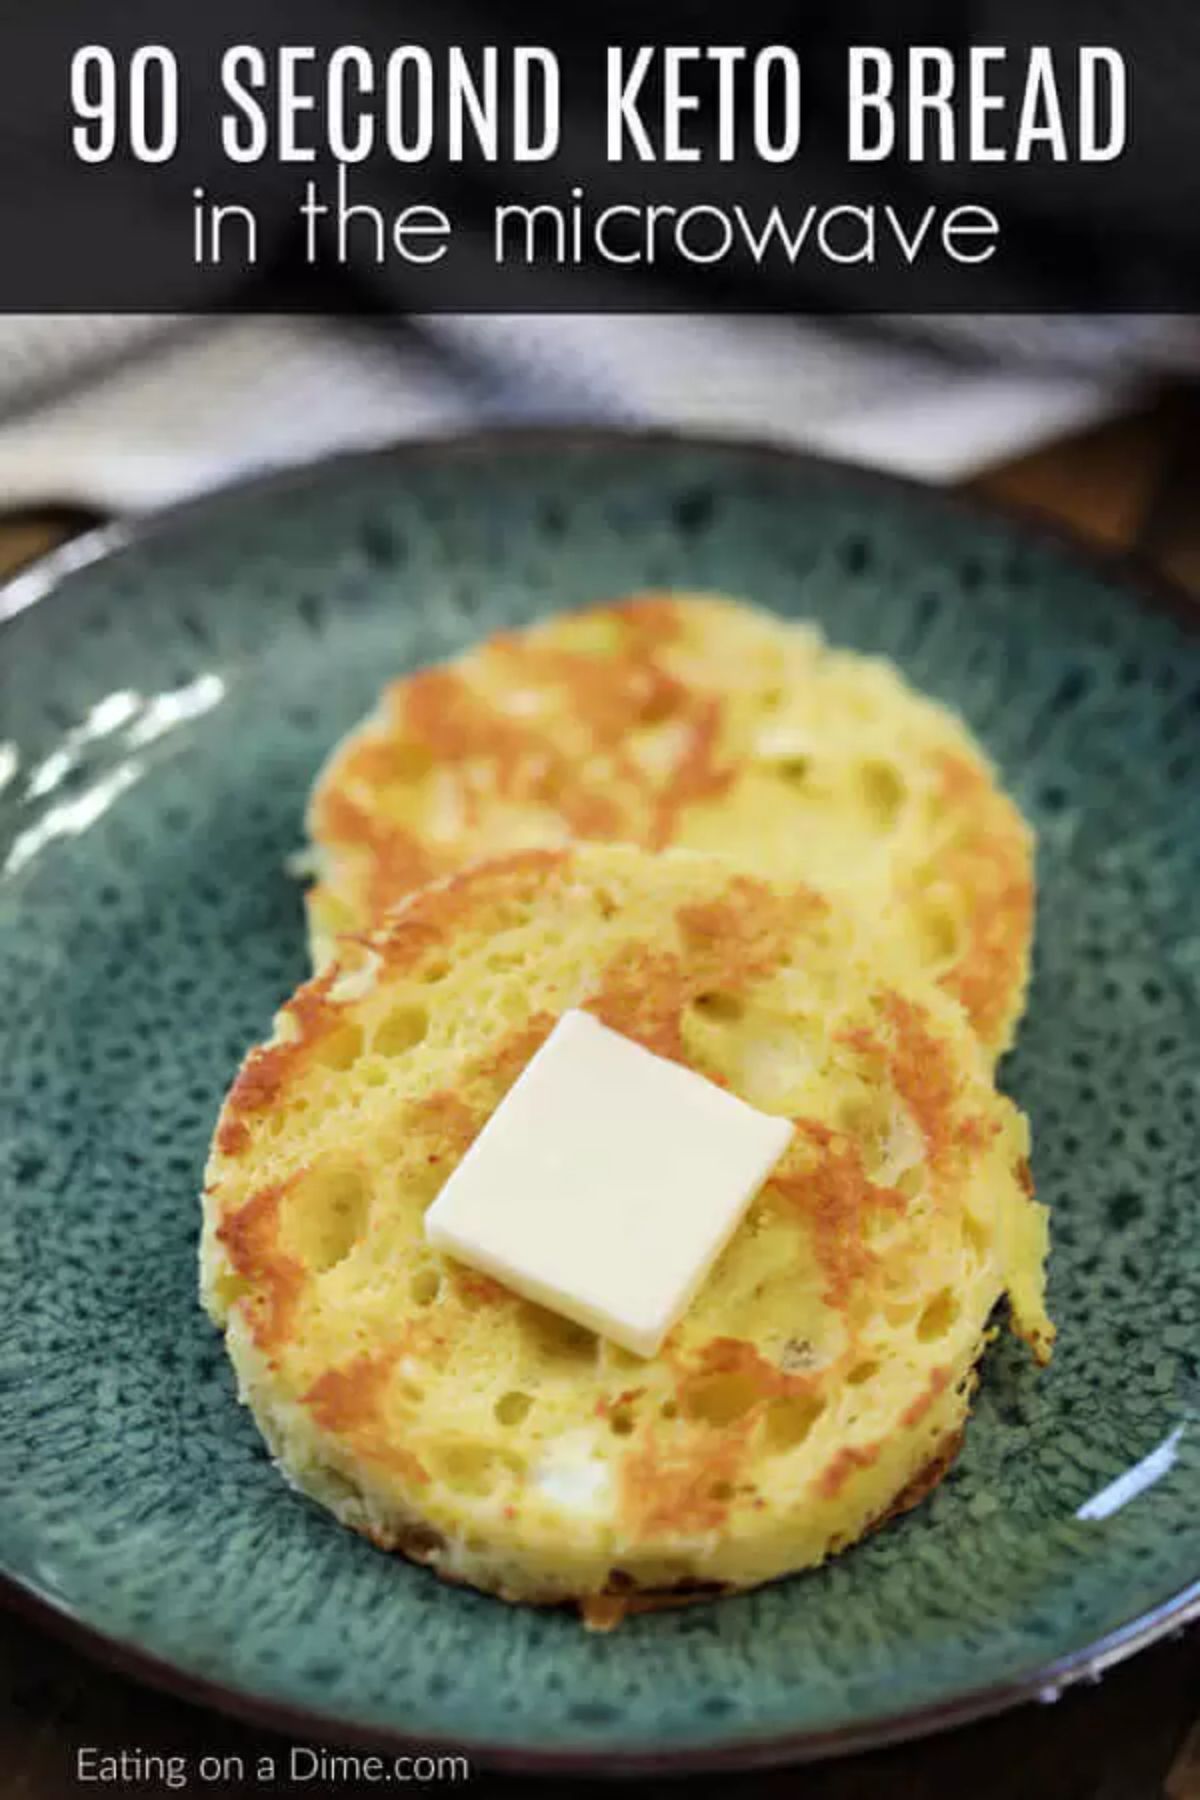 The text reads "90 second keto bread in the microwave". On a speckled green plate are two round slices of bread with a square of butter in the middle of it